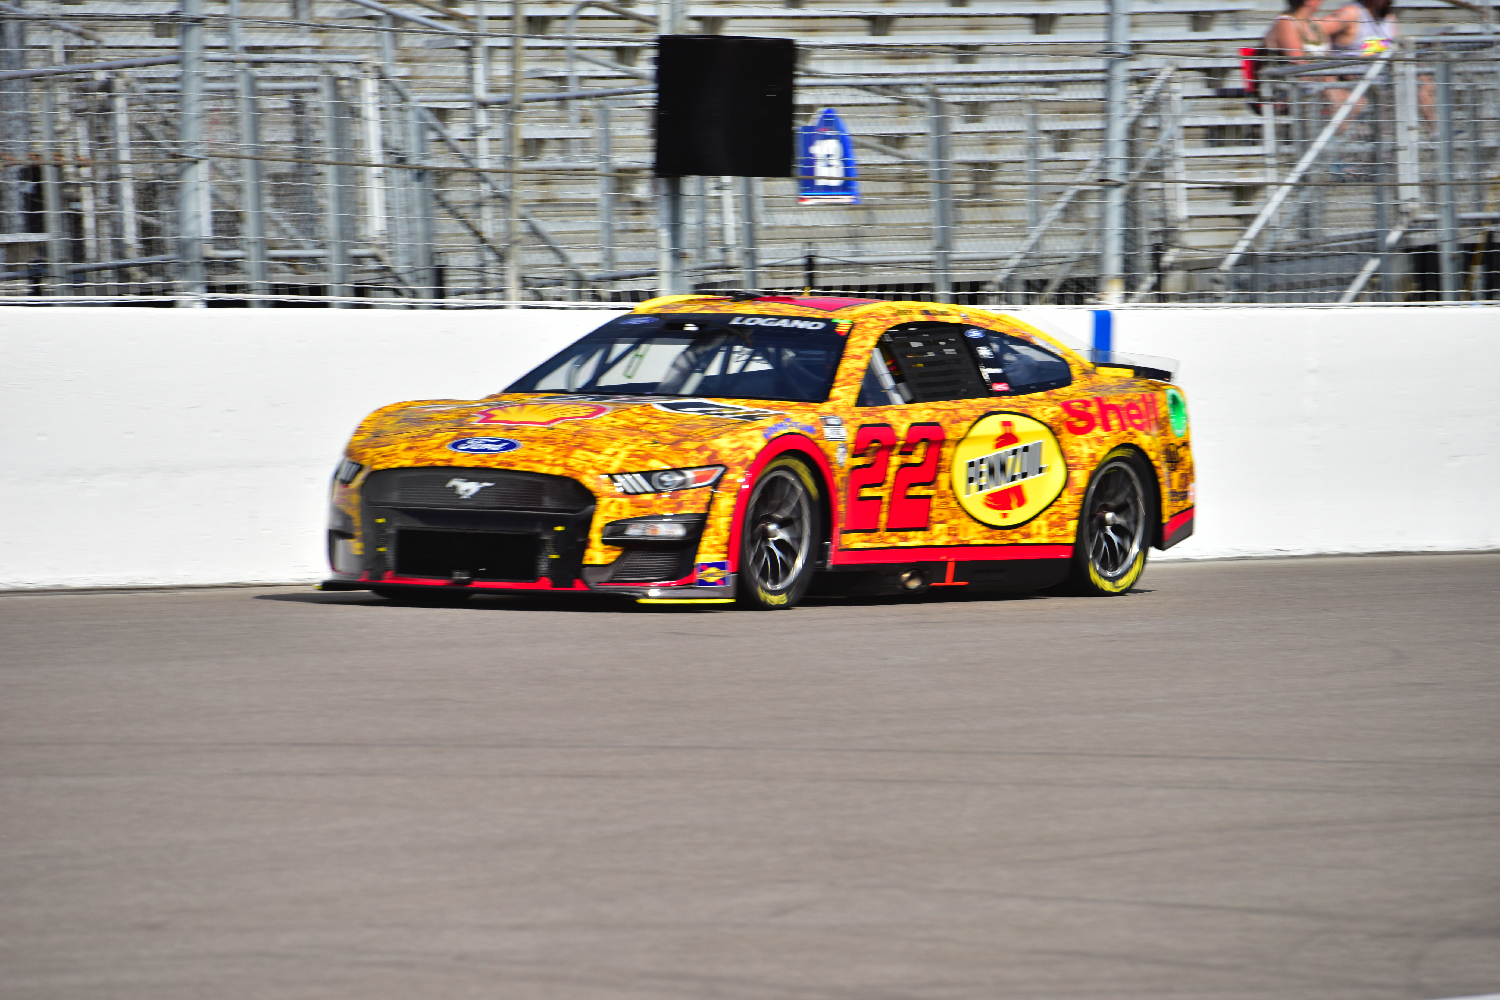 Logano looks to add more to Shell Pennzoil's mosaic of success at Gateway. (Photo: Travis Haston | The Podium Finish)